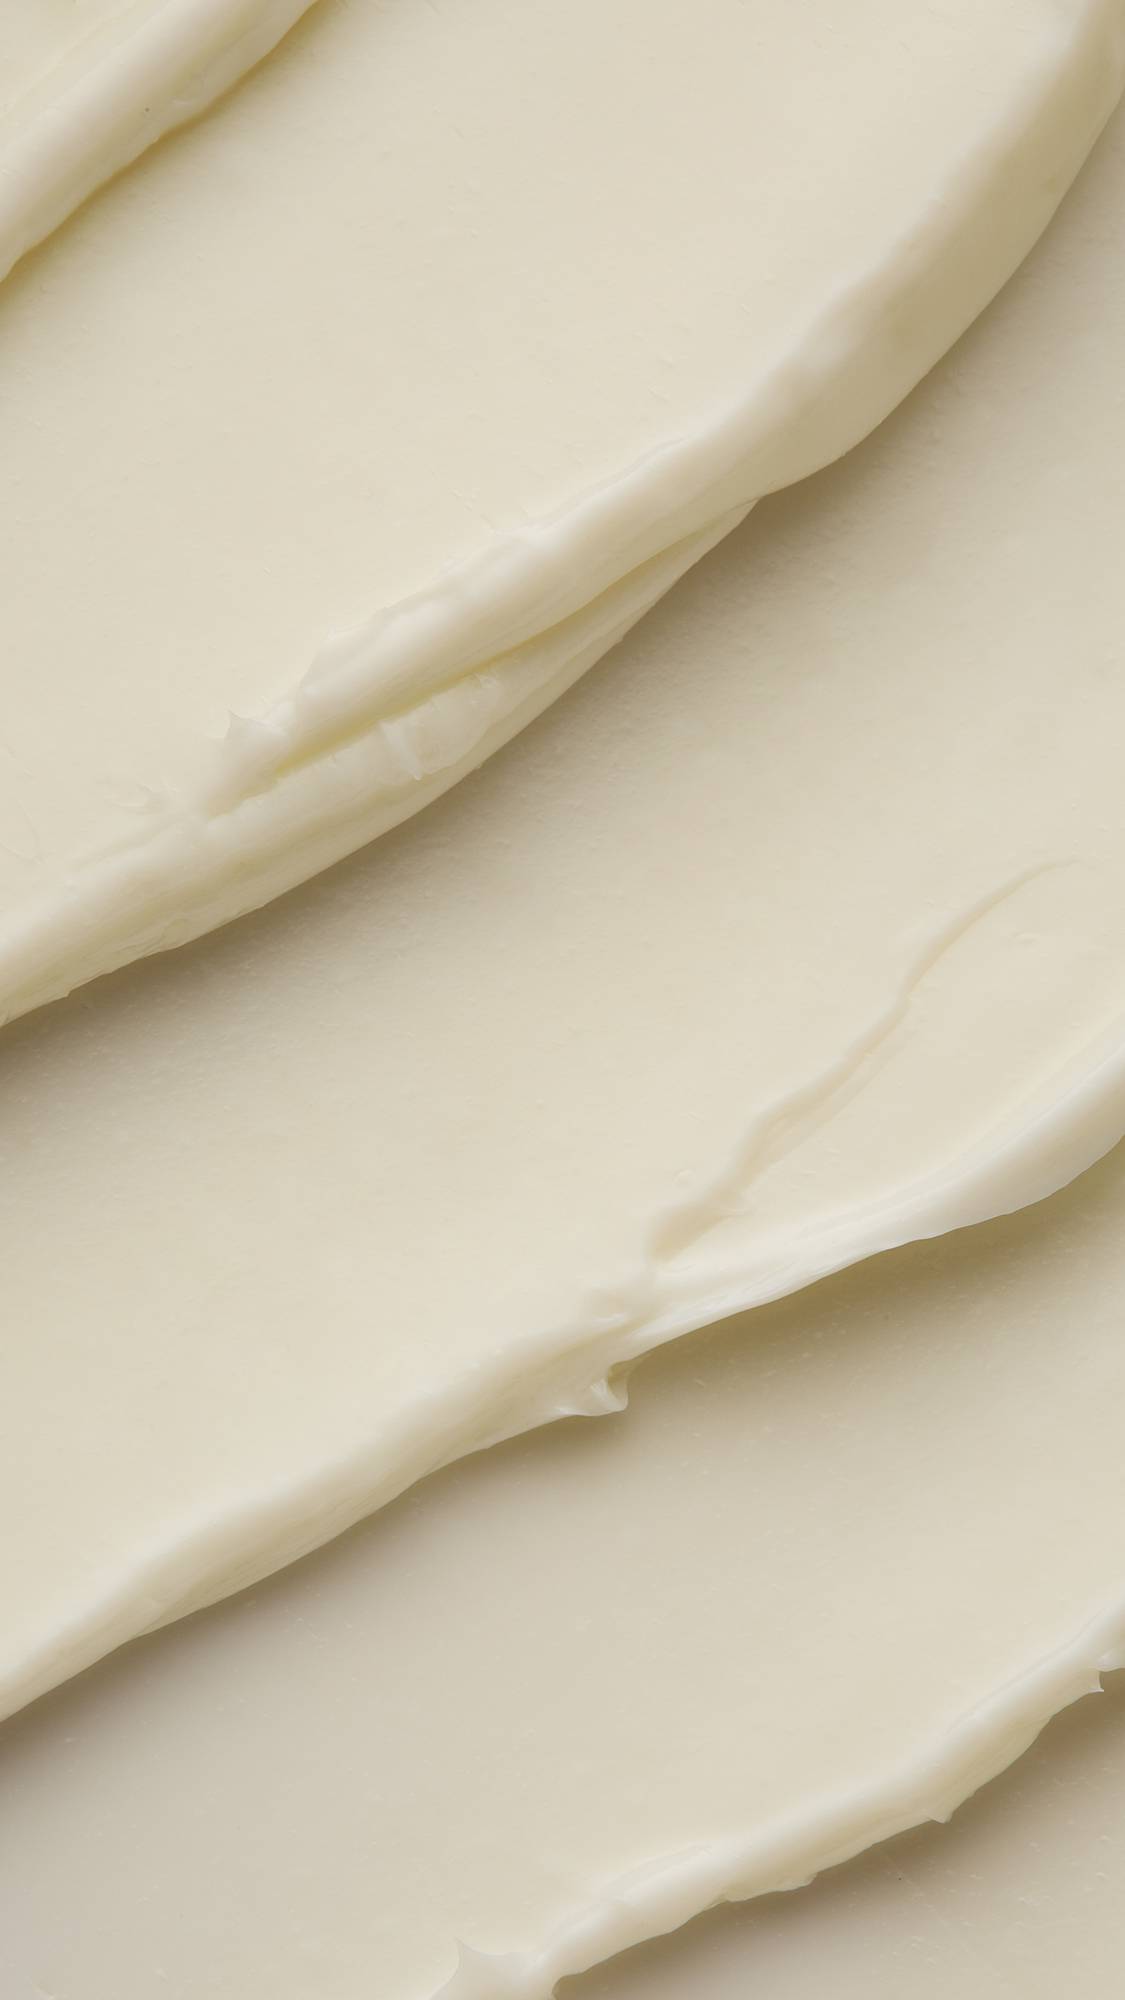 A super close-up of the Peace moisturiser focusing on the almost velvety, fabric-like waves of creamy, satin, lotion.